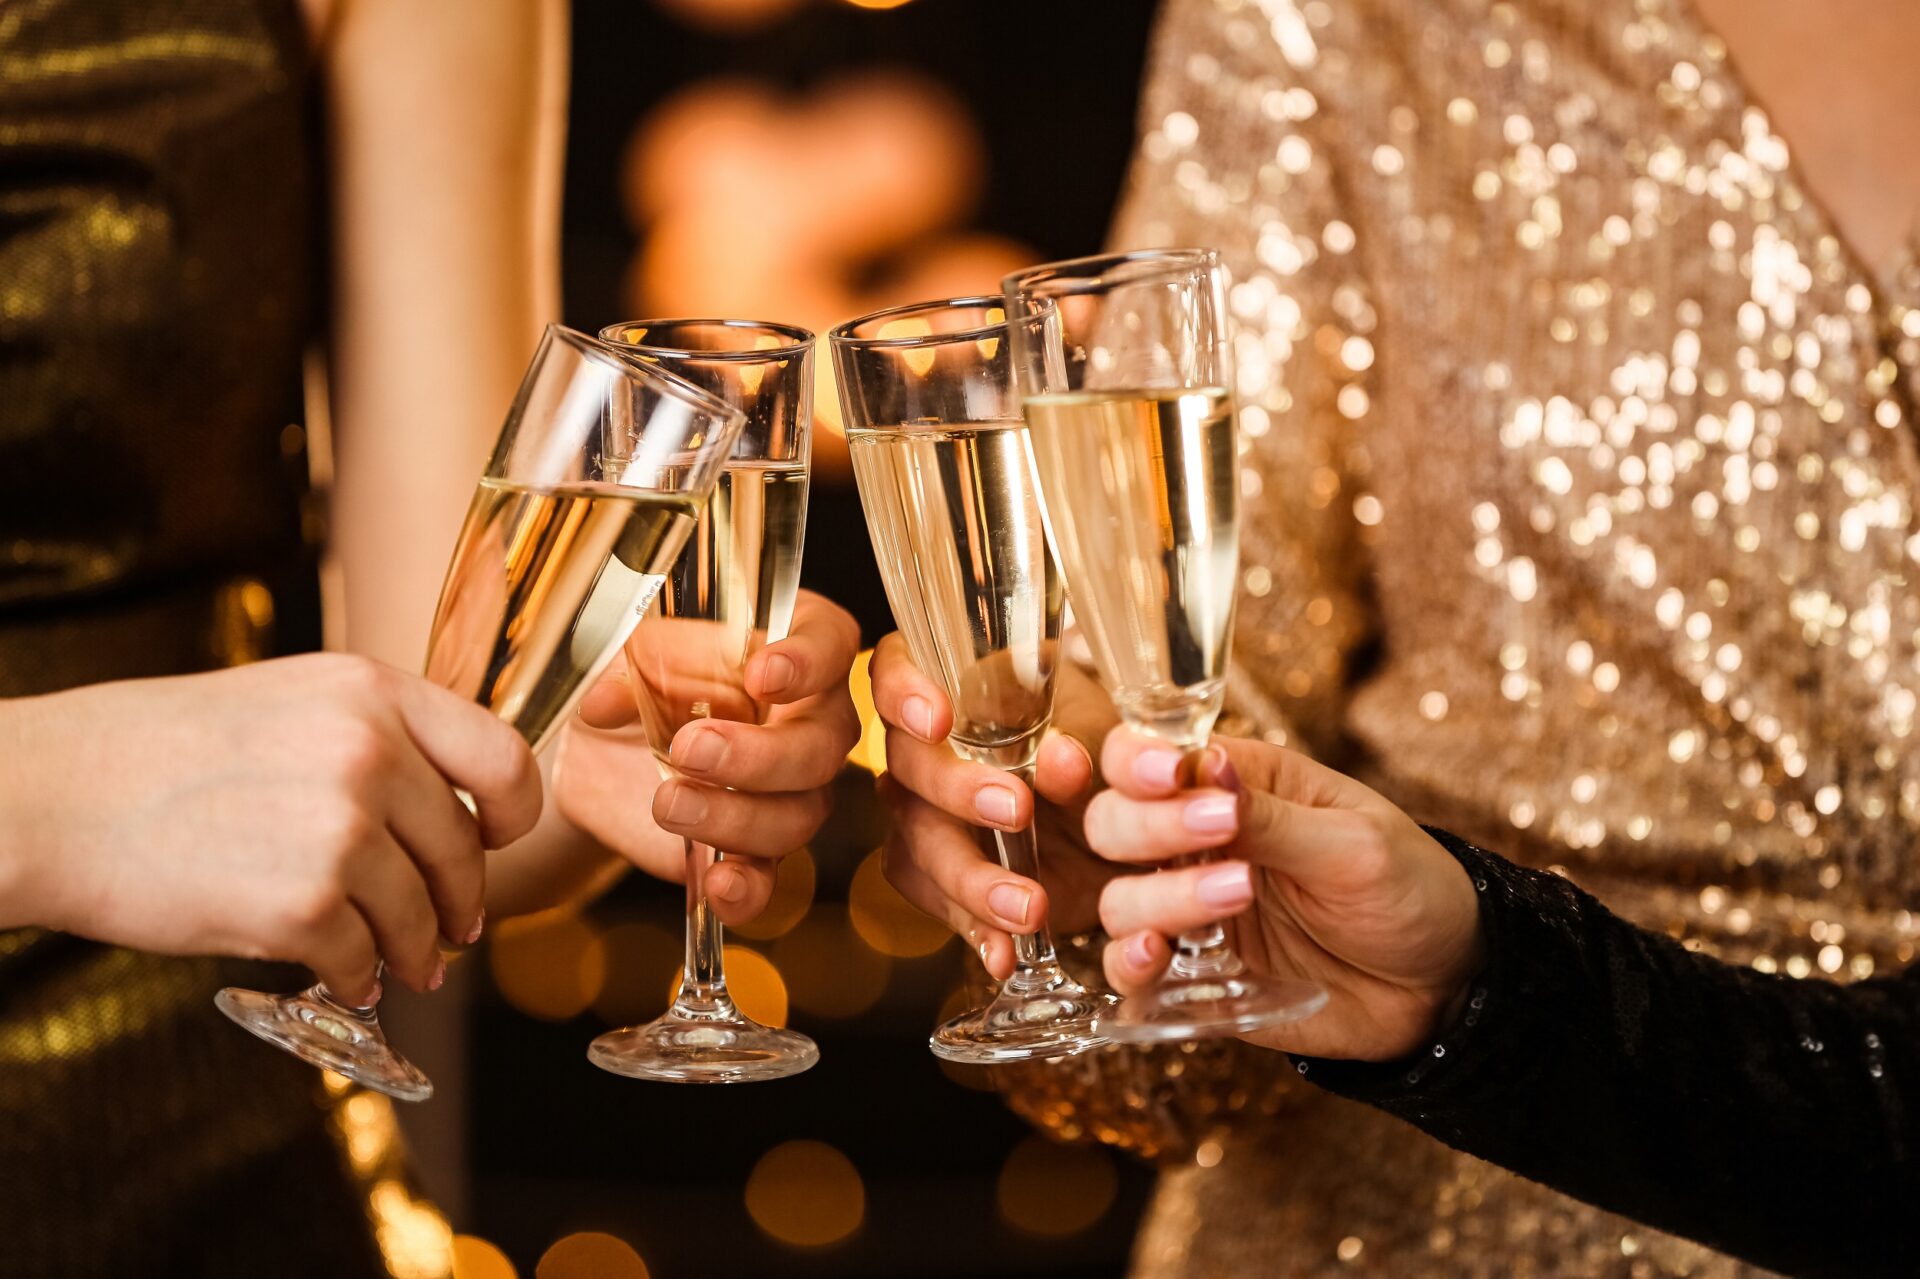 Clinking champagne glasses at a new year's party